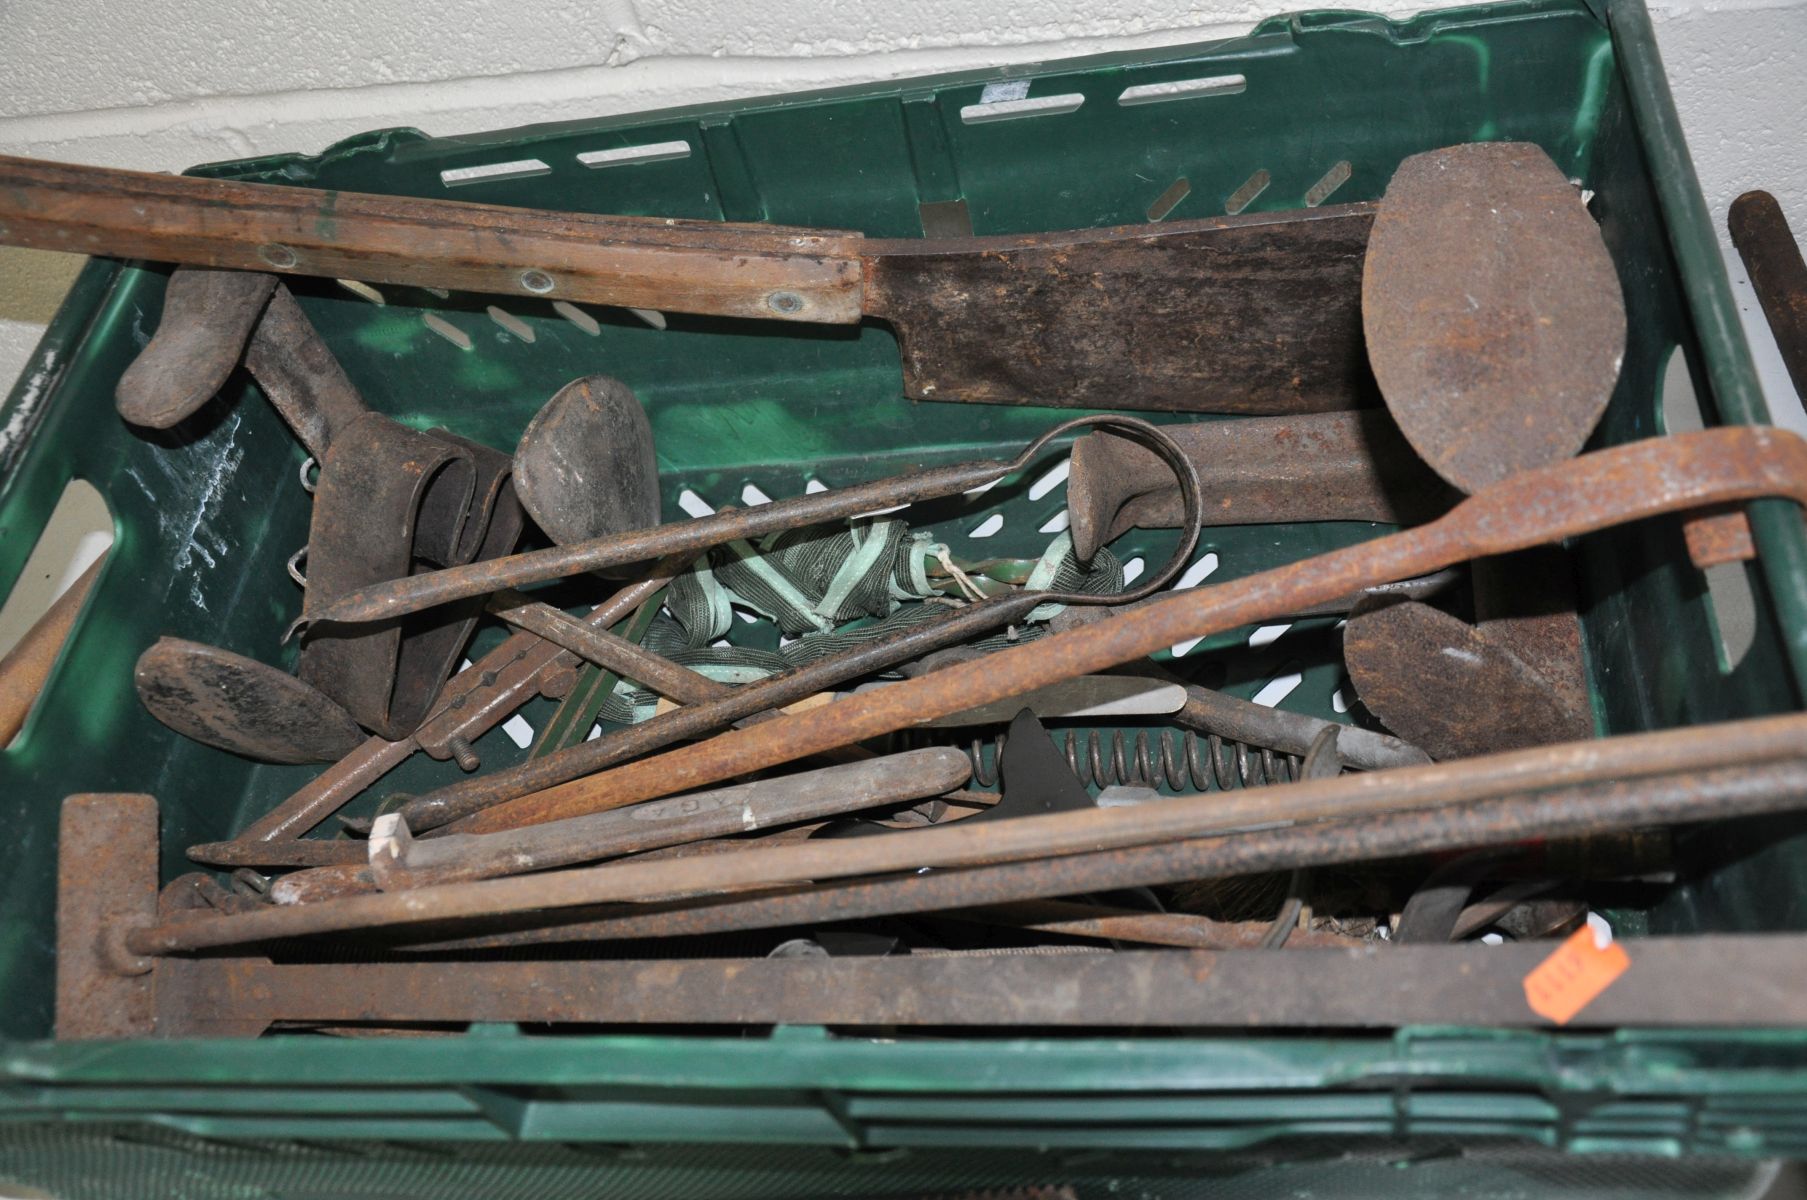 A TRAY CONTAINING VINTAGE TOOLS, door furniture, and fire furniture, including tap wrenches, show - Image 4 of 4